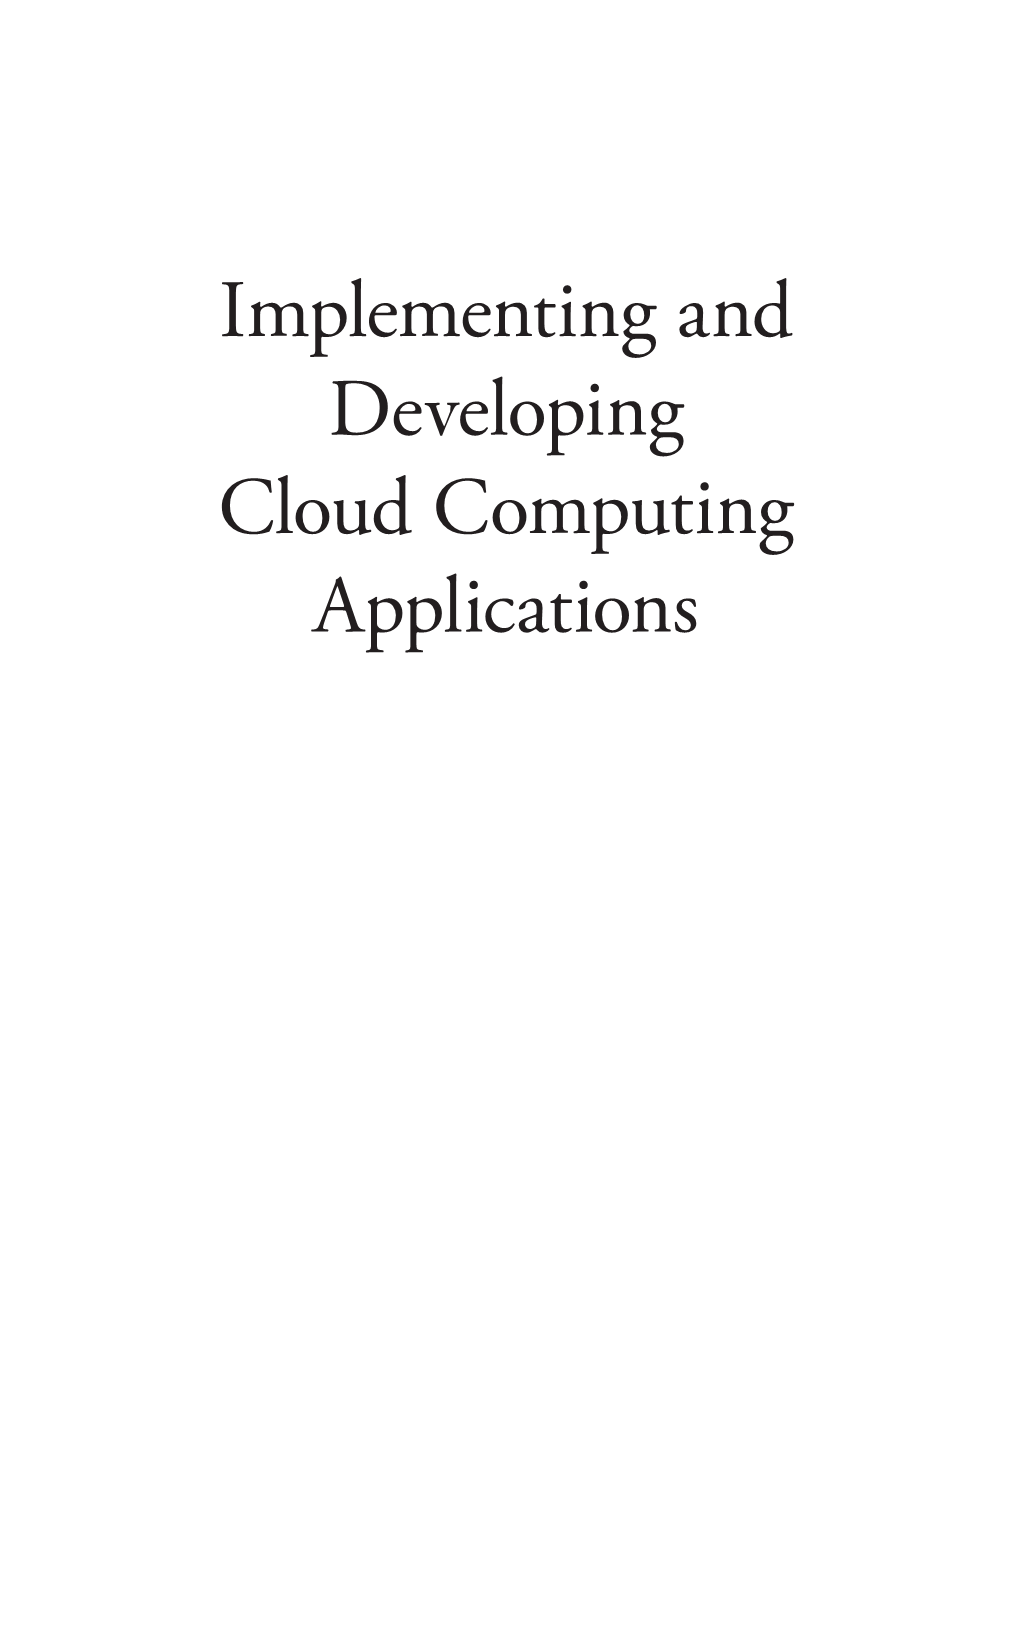 Implementing and Developing Cloud Computing Applications [2011]